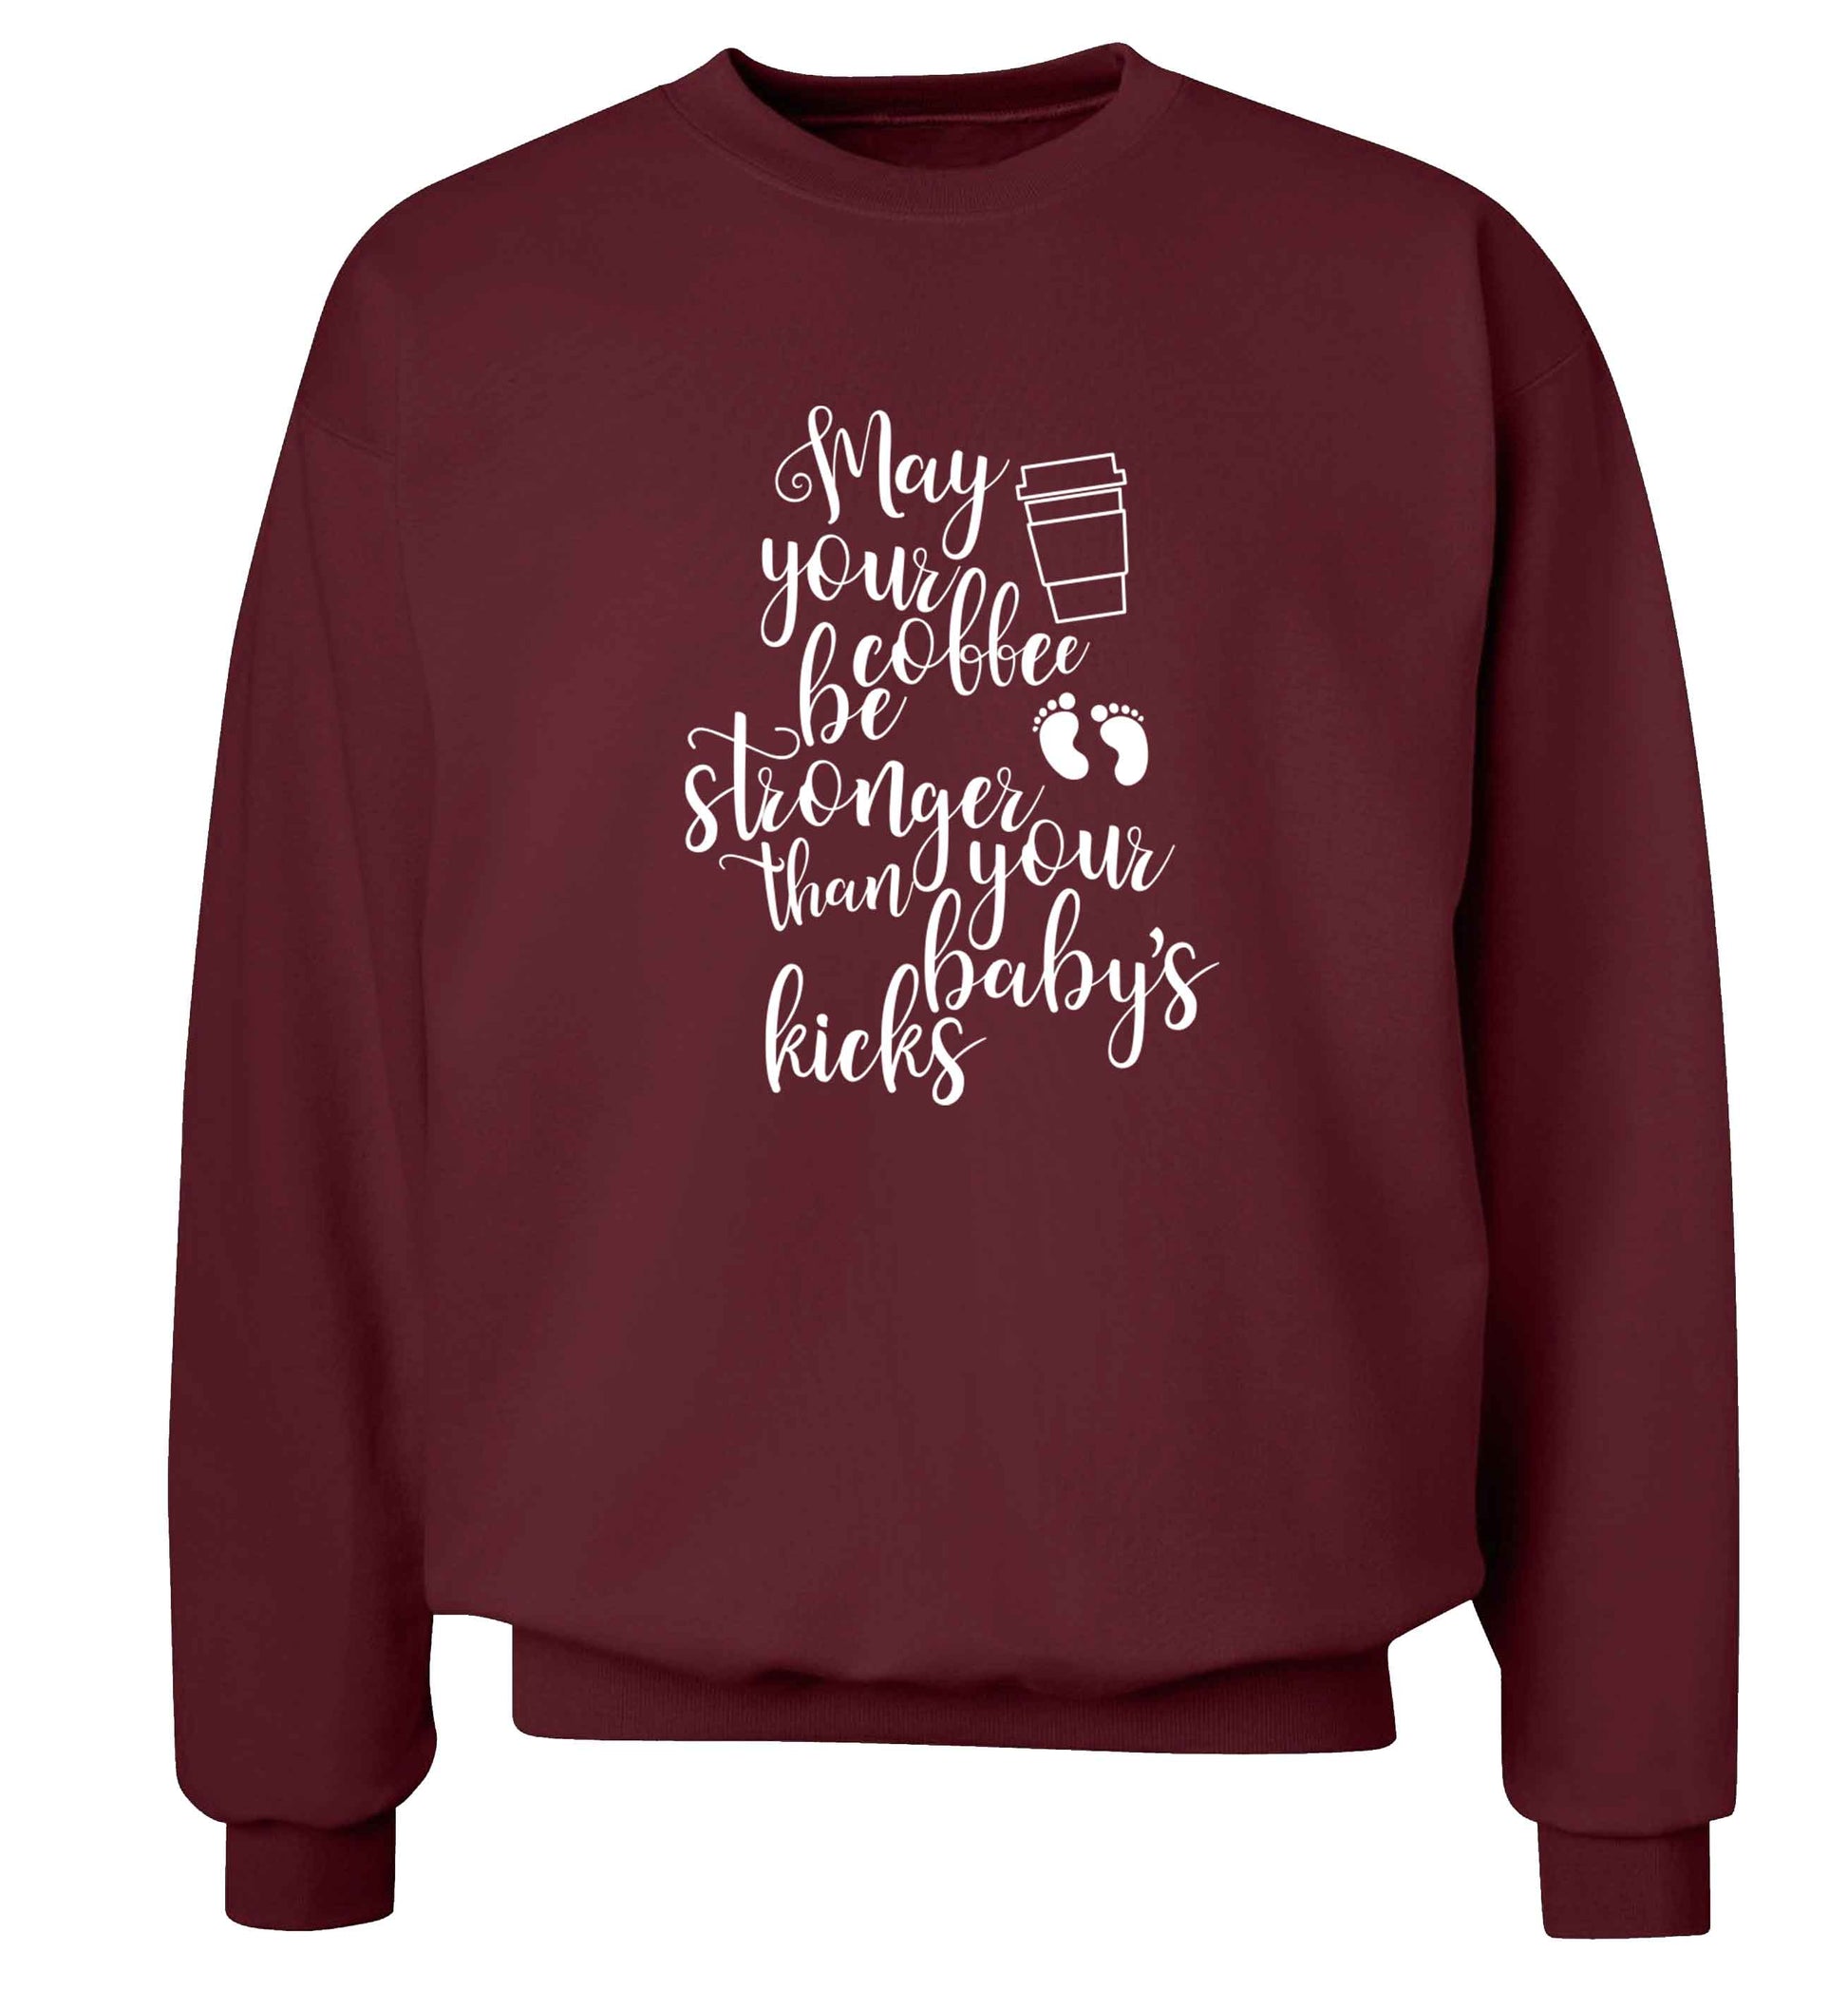 May your coffee be stronger than your babies kicks Adult's unisex maroon Sweater 2XL